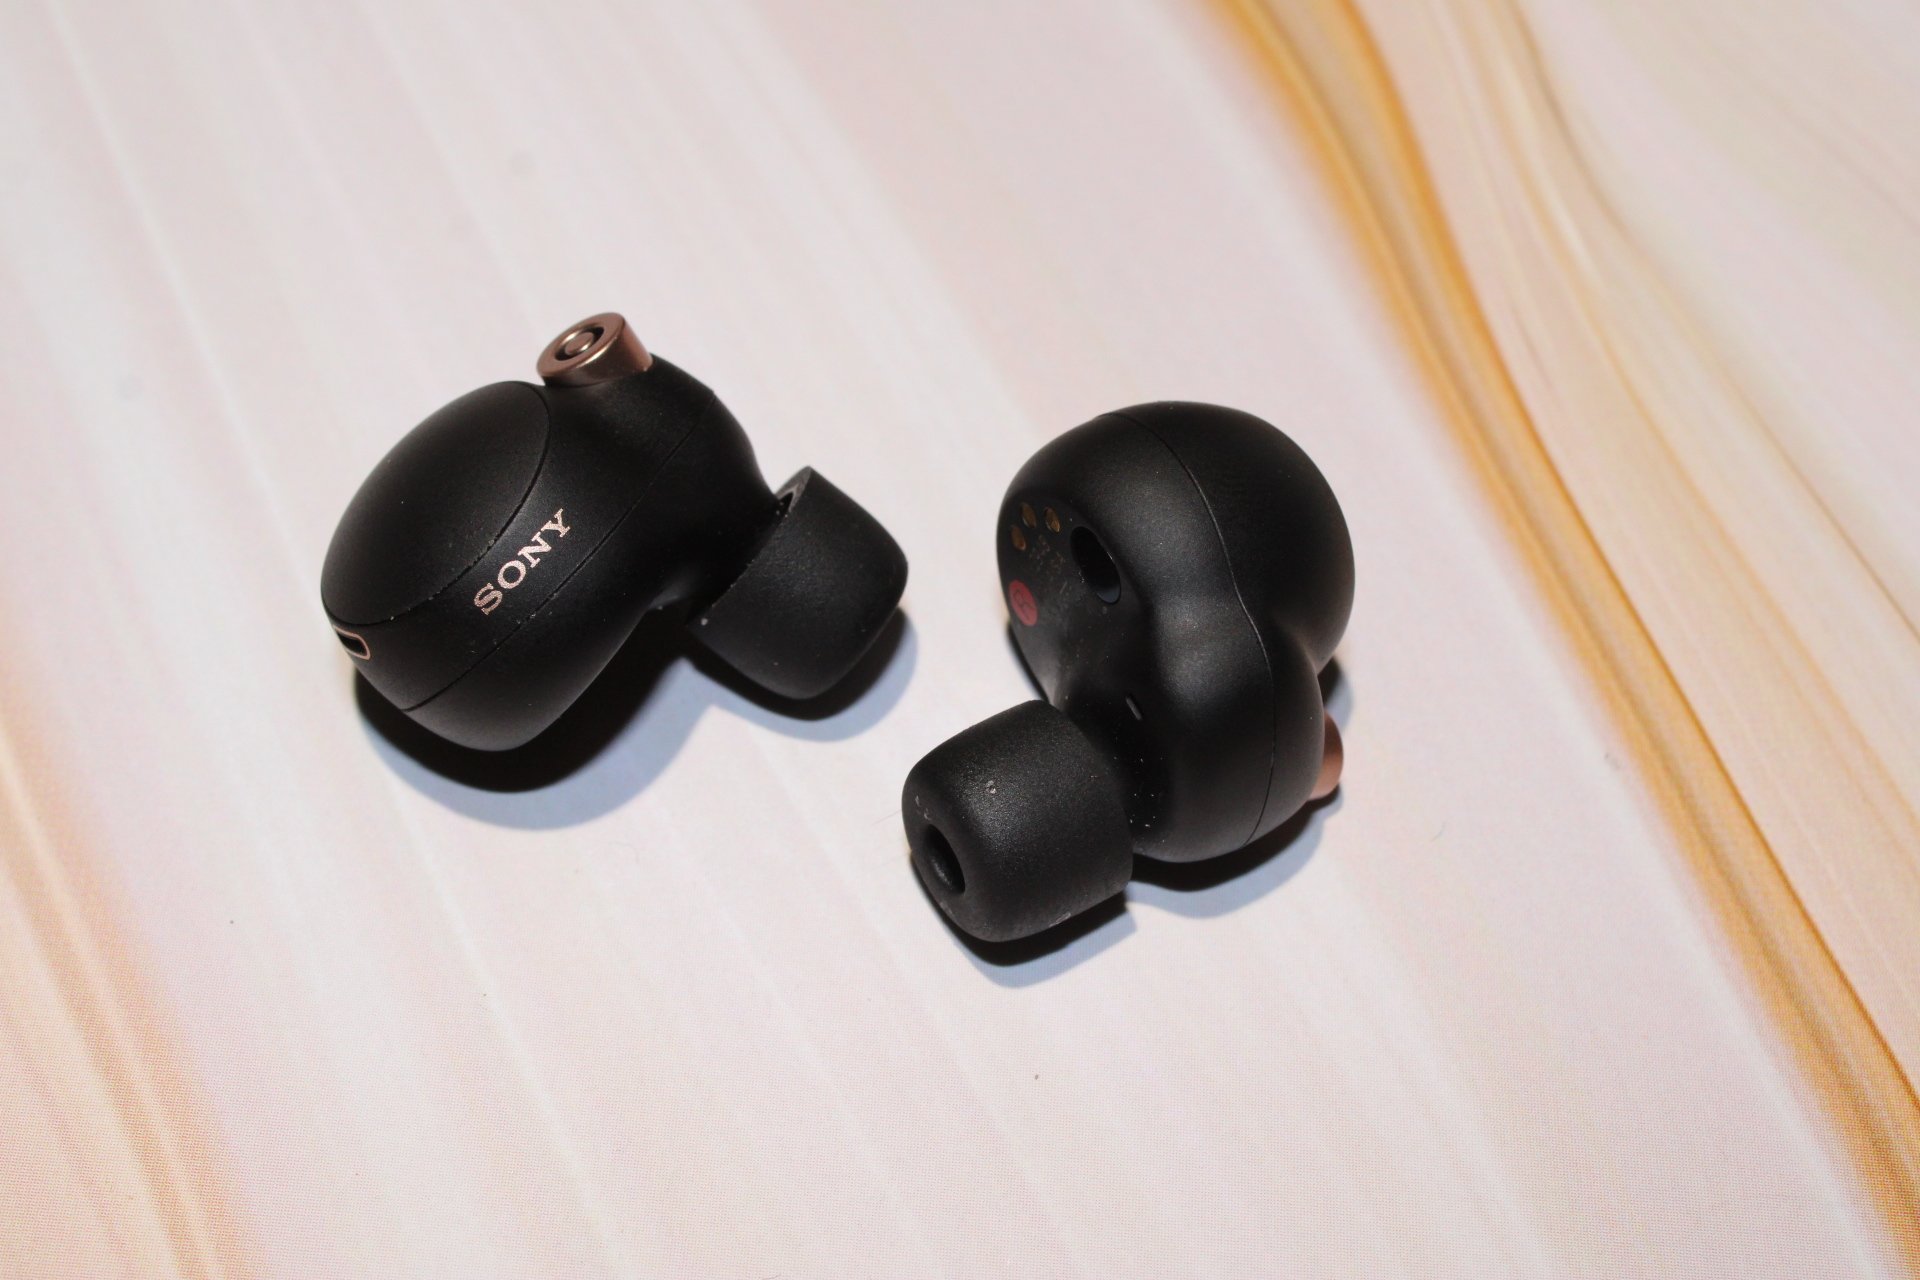 Sony Wf1000xm4 earbuds lying on table